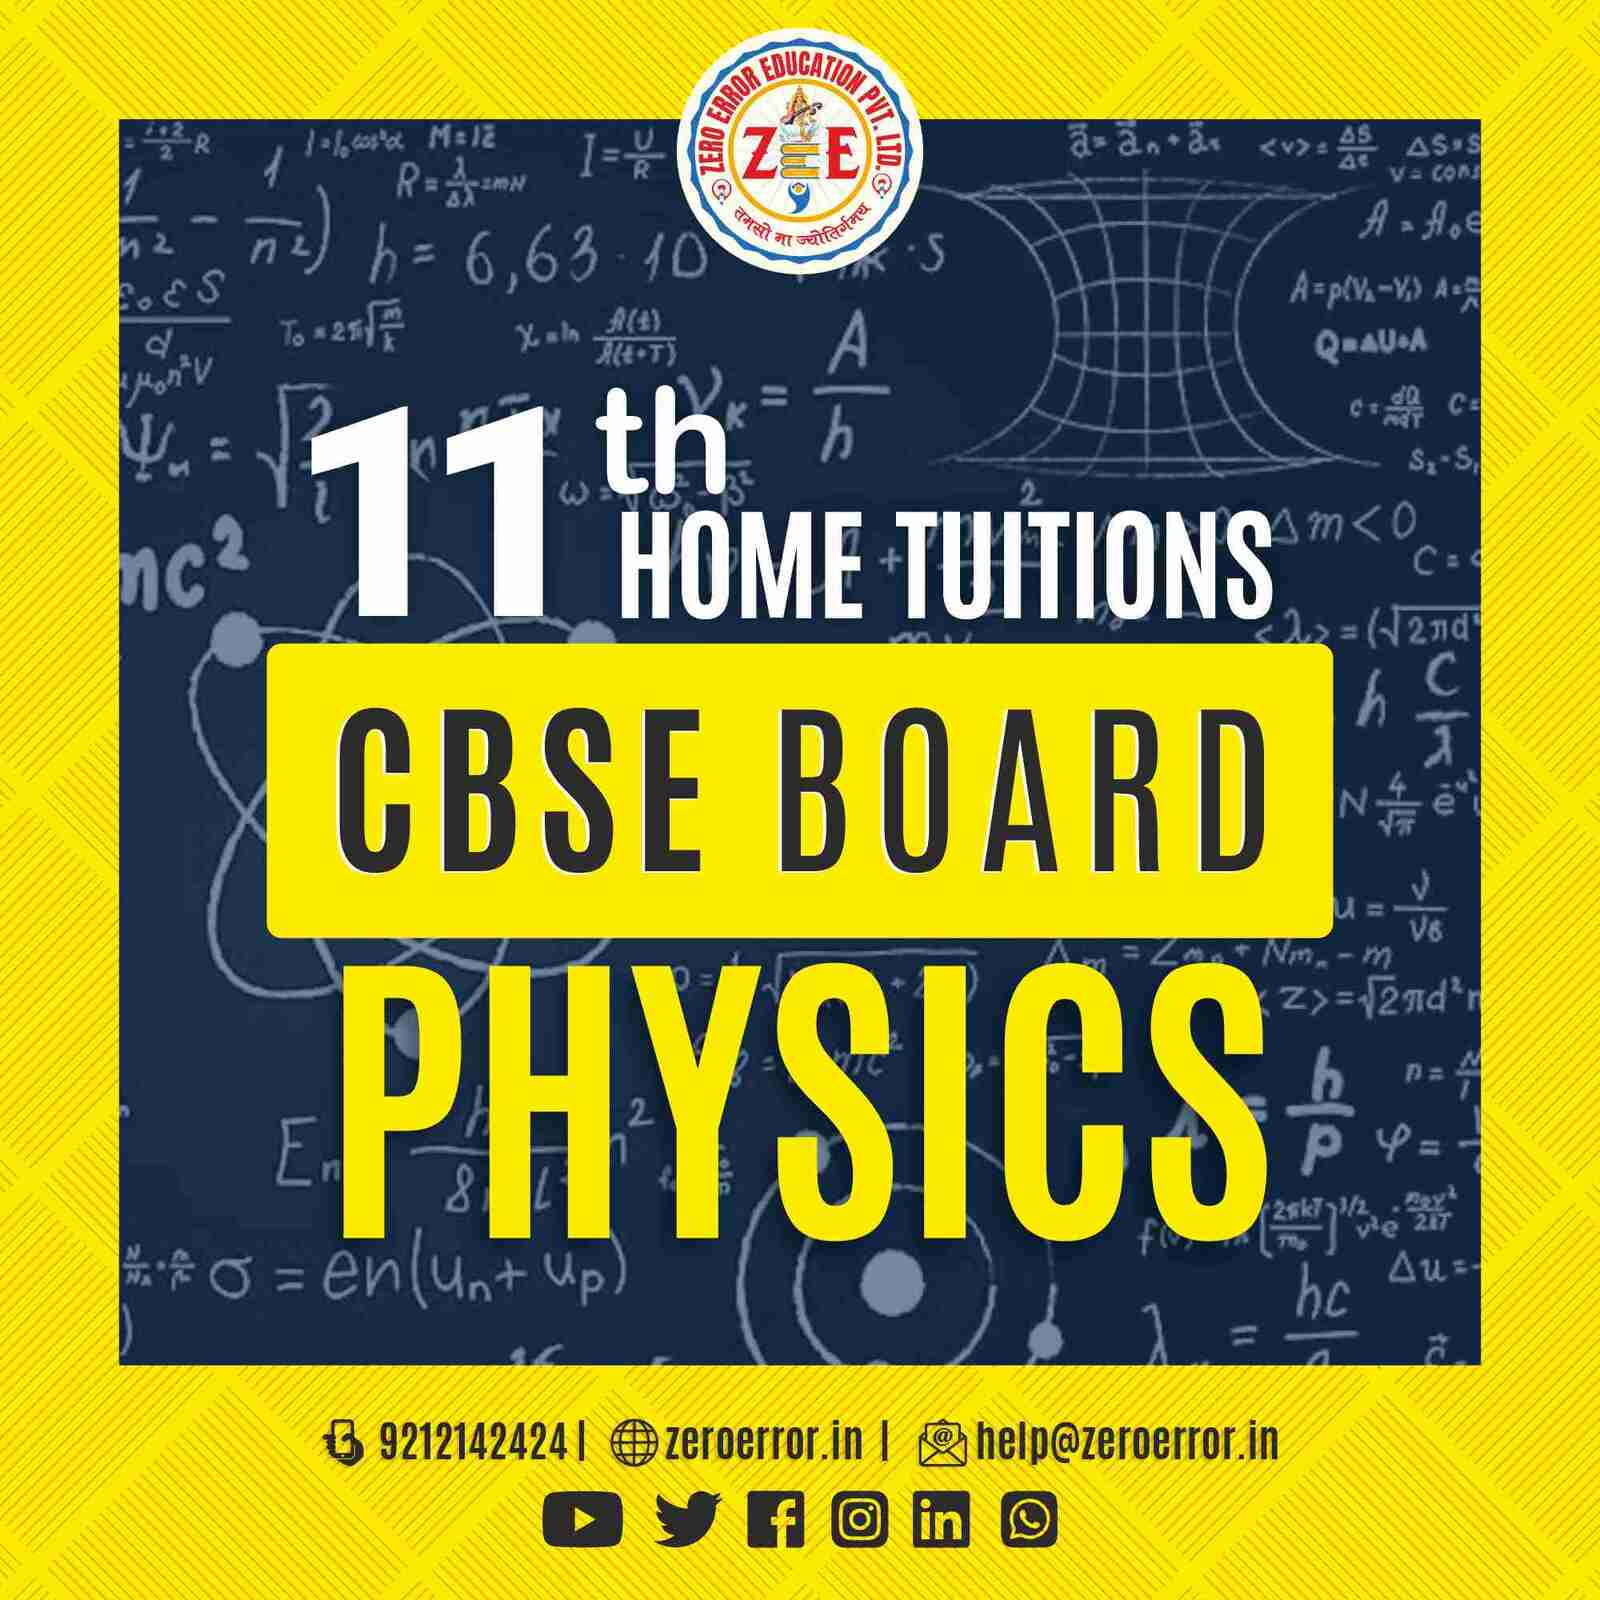 11th Grade CBSE Physics Online Classes by Zero Error Education Prepare for your CBSE board exams with online and offline Physics classes for 11th grade. Learn from experienced home tutors and get all the help you need to succeed. Enroll today at Zero Error Education. [https://zeroerror.in/] Call 9212142424 for more information.